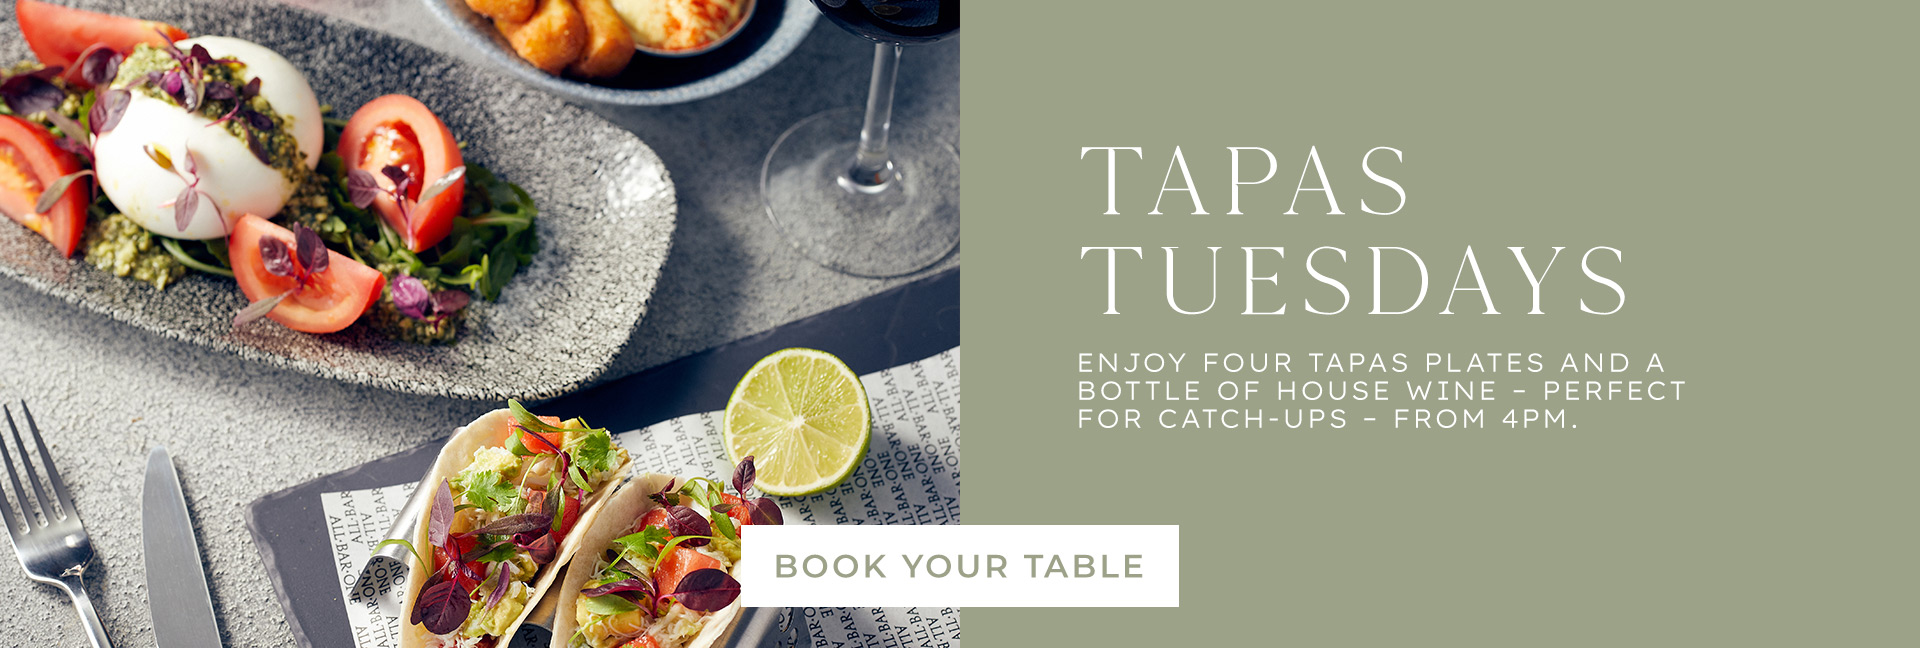 Tapas Tuesday at All Bar One New Oxford Street - Book now